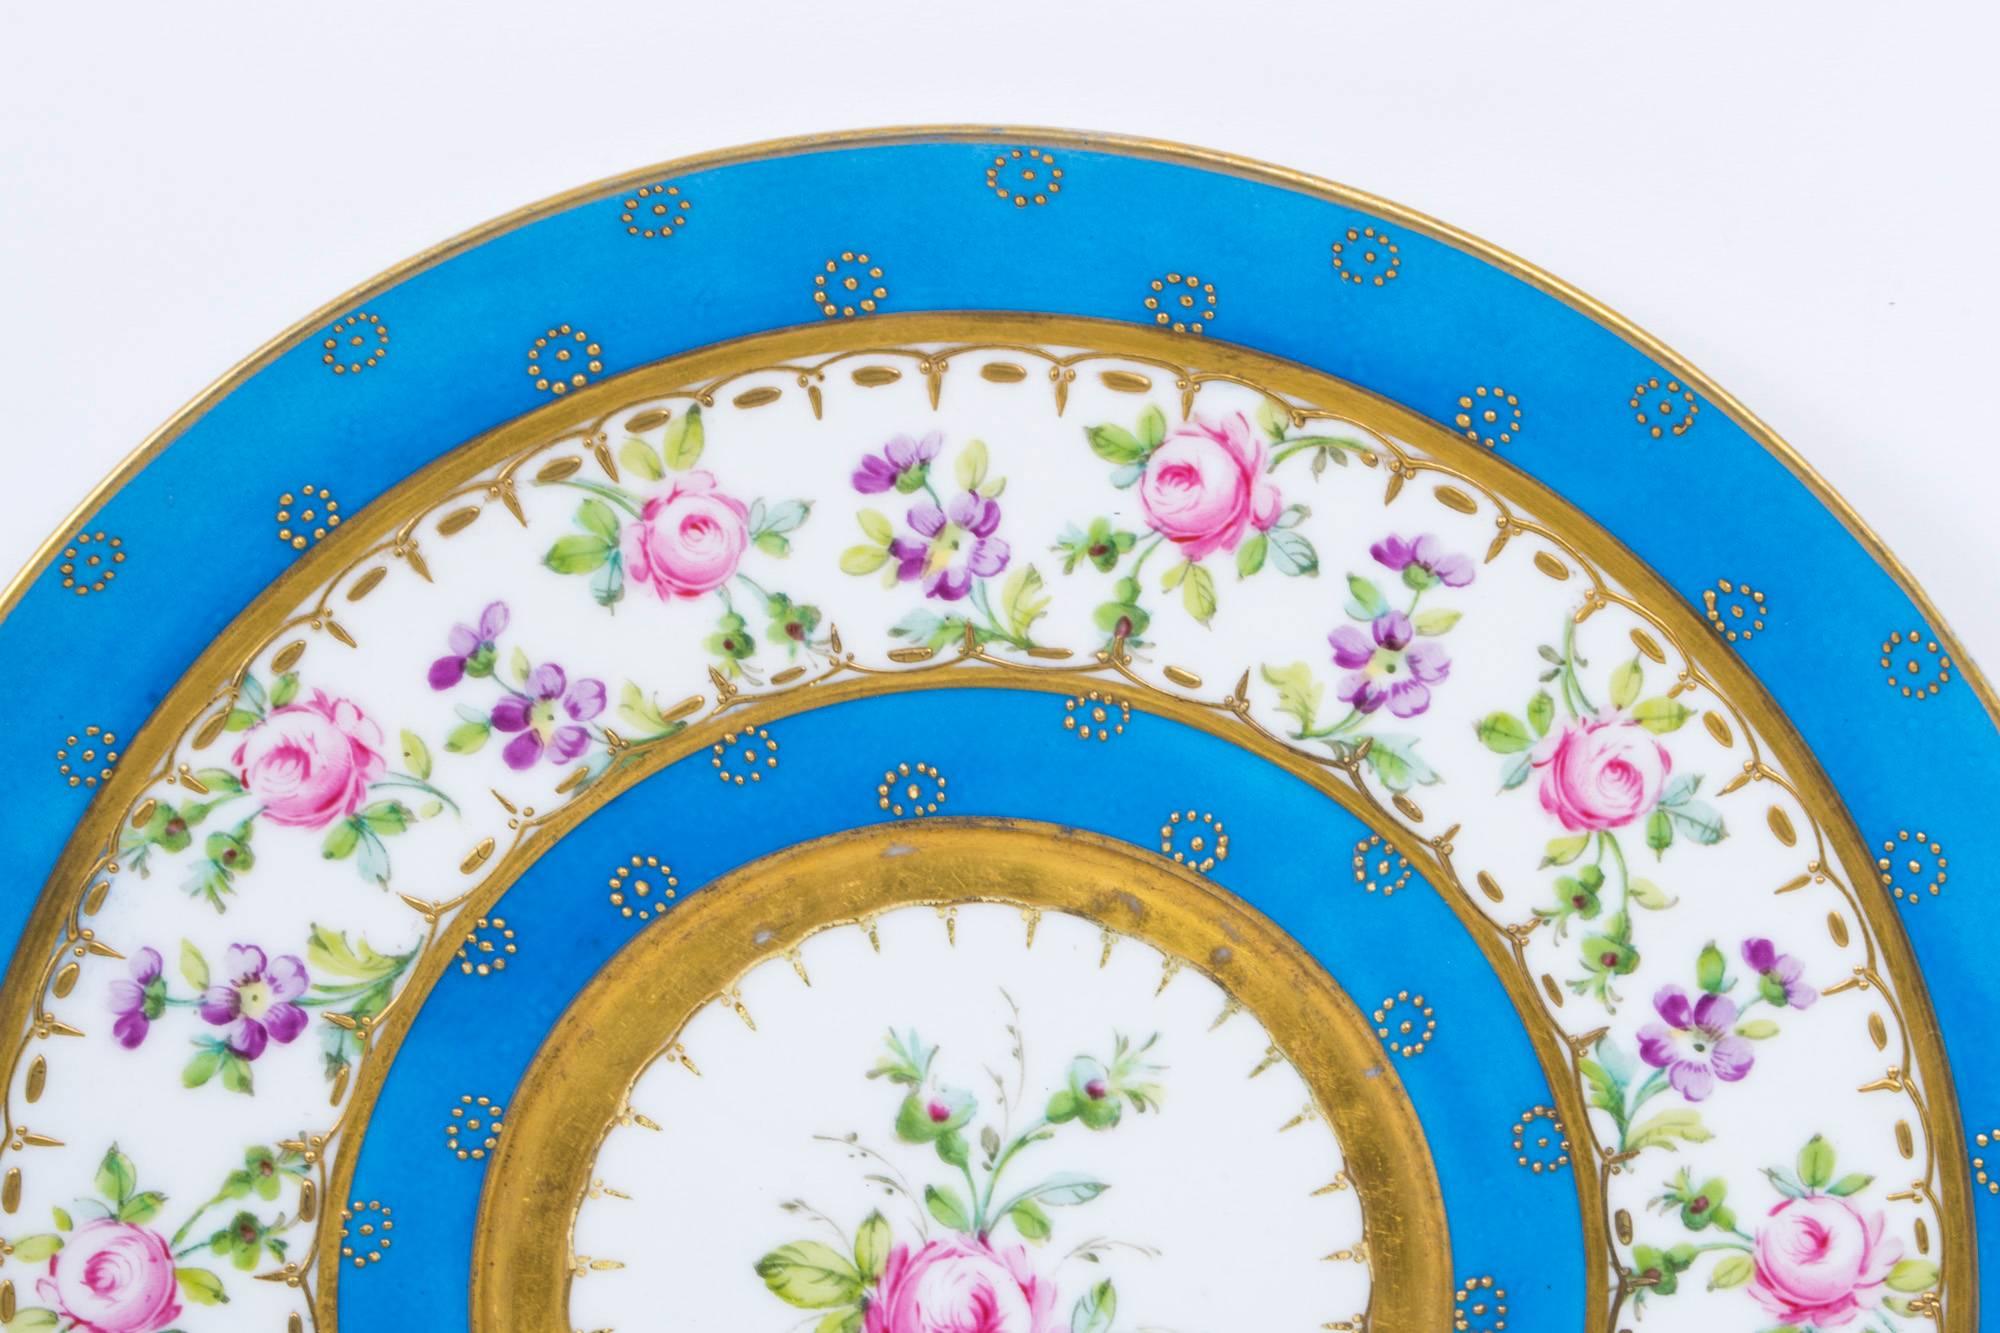 This is a beautiful antique "Bleu Celeste" Sevres porcelain cabinet plate, circa 1880 in date.

It has superb tooled gilding and is enamelled with roses and violets.
on.

It bears the interlaced L's mark for Sevres on the